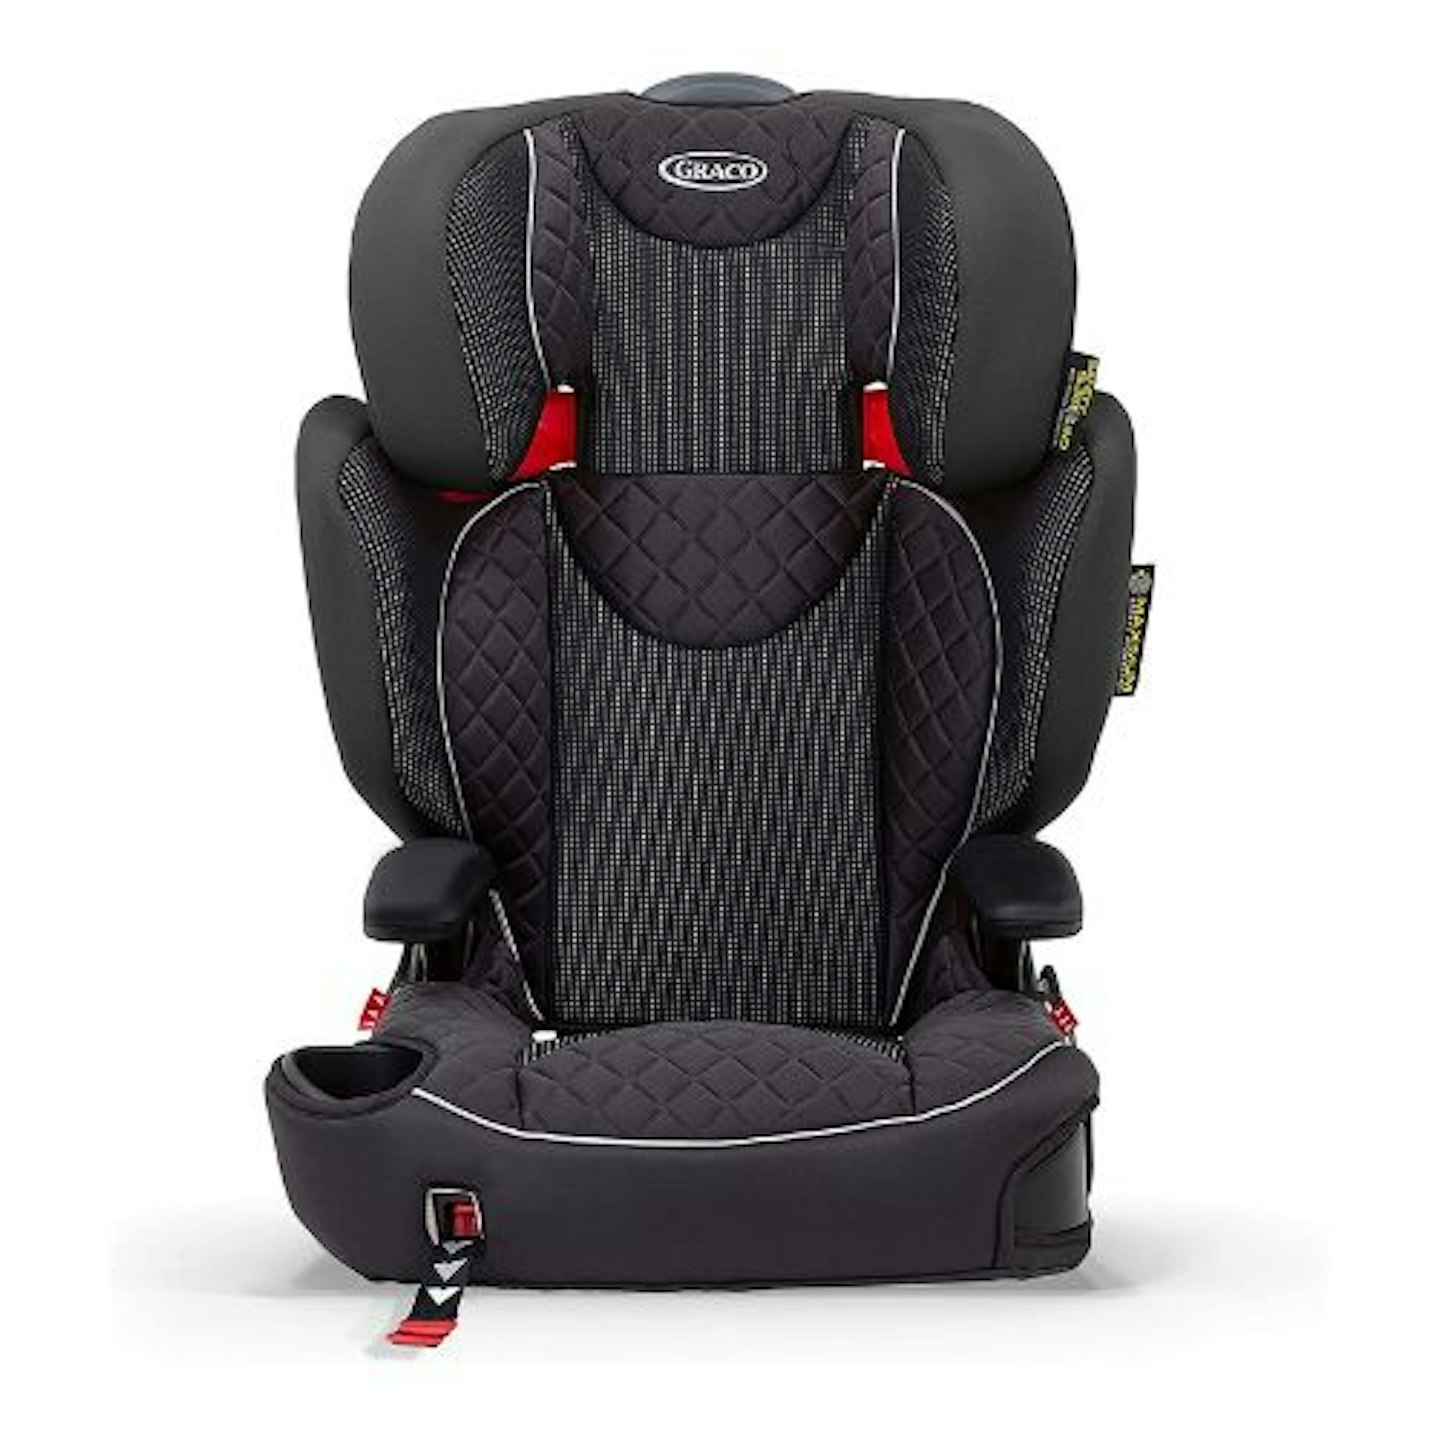 Amazon Prime Day Graco Affix High back Booster Car Seat 